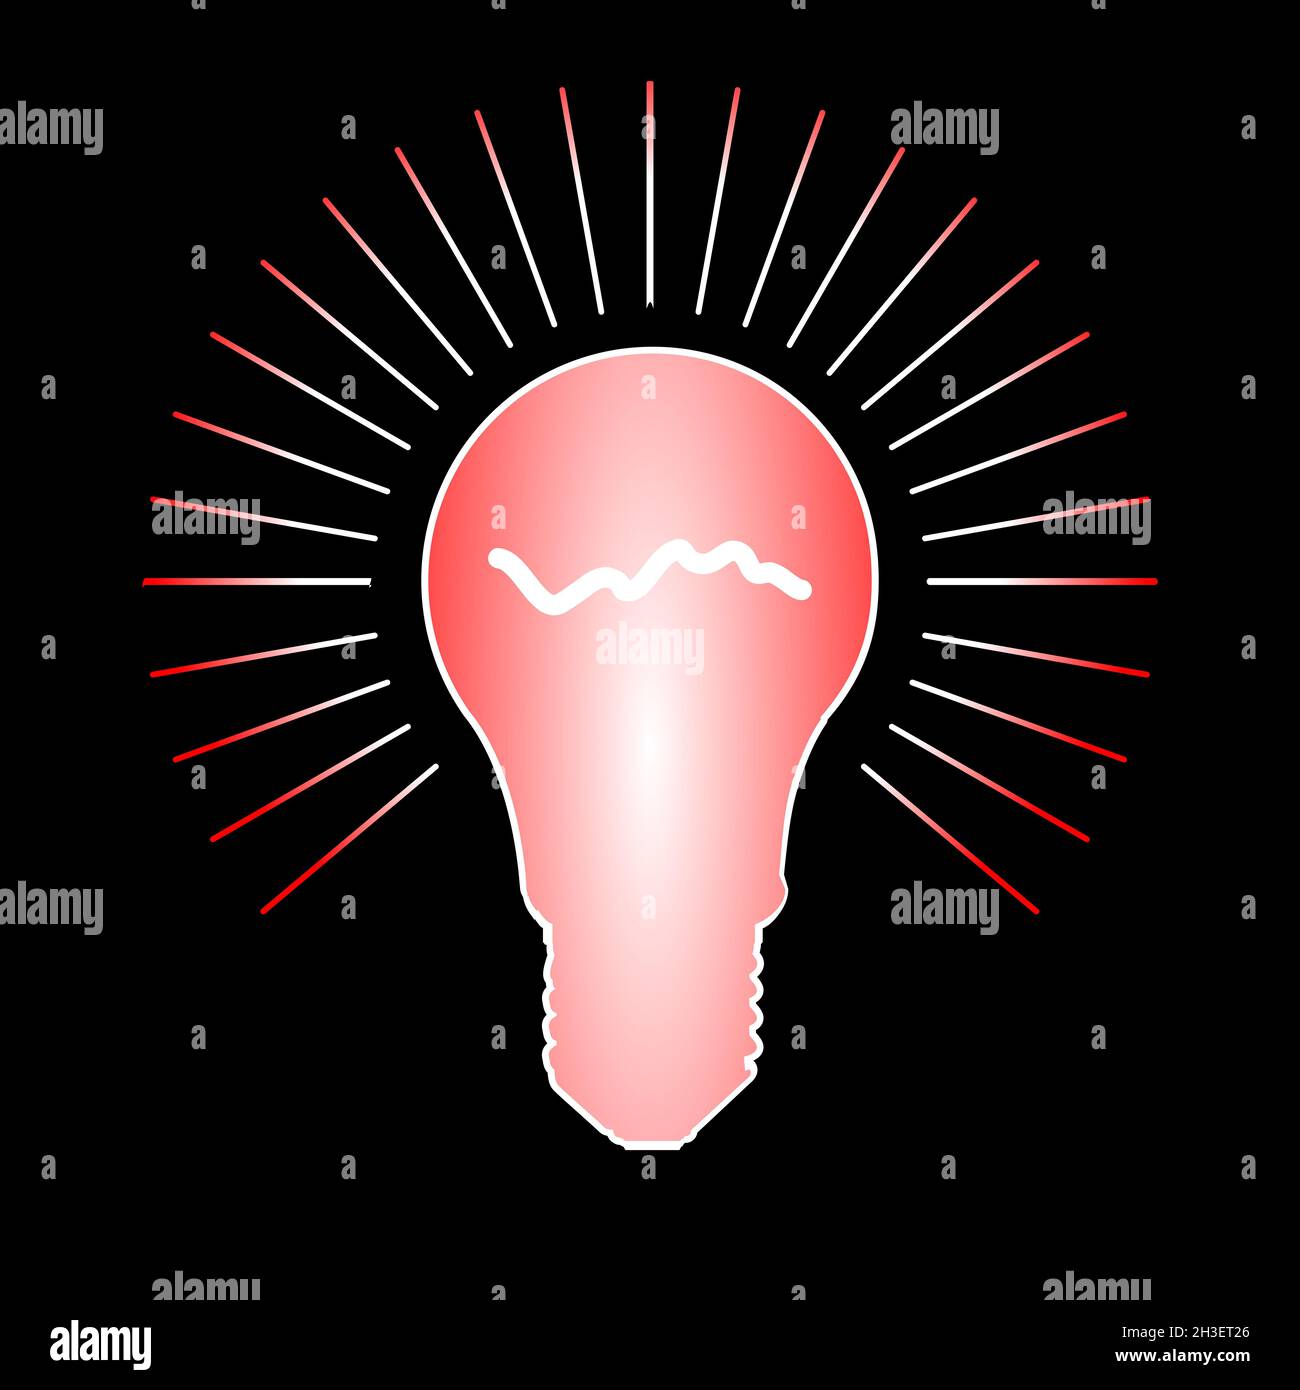 Cartoon style glowing light bulb shape set over a colored background Stock Photo